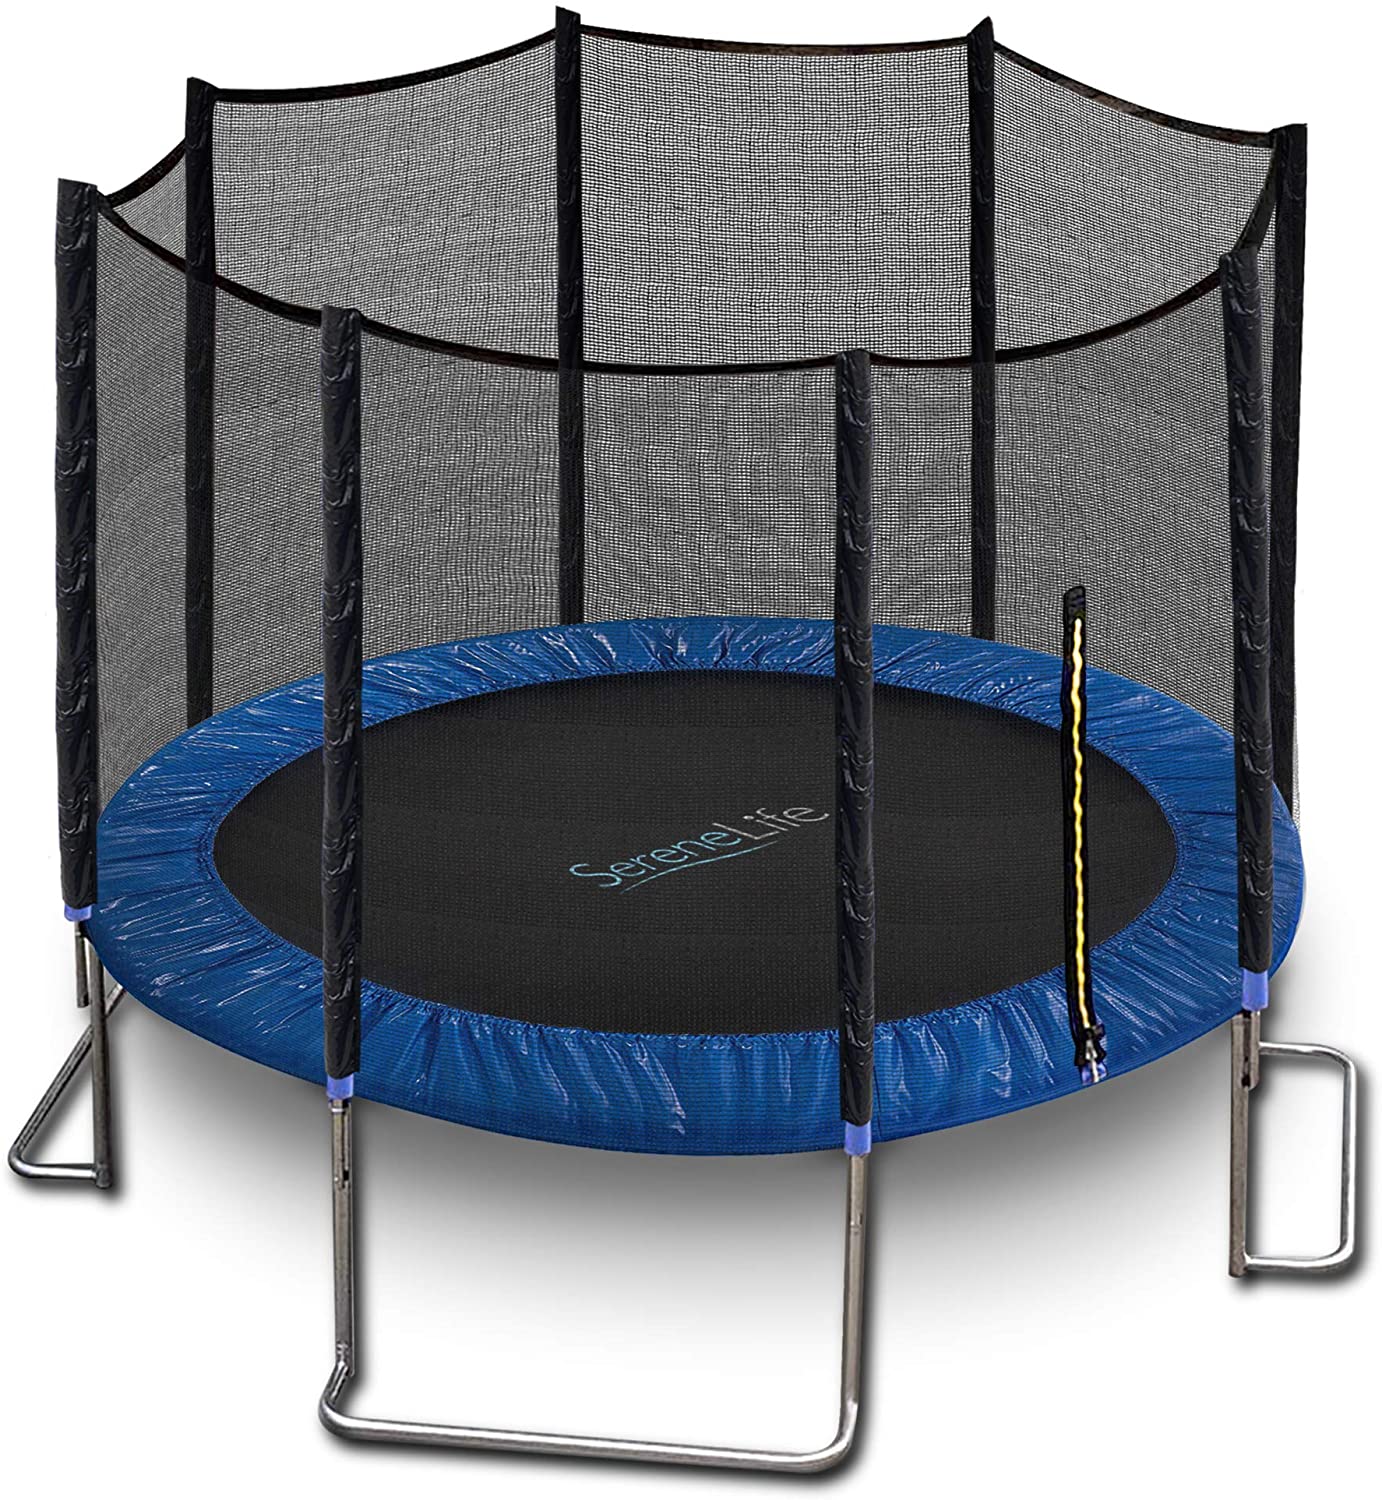 SereneLife 10ft ASTM Approved Trampoline with Net Enclosure